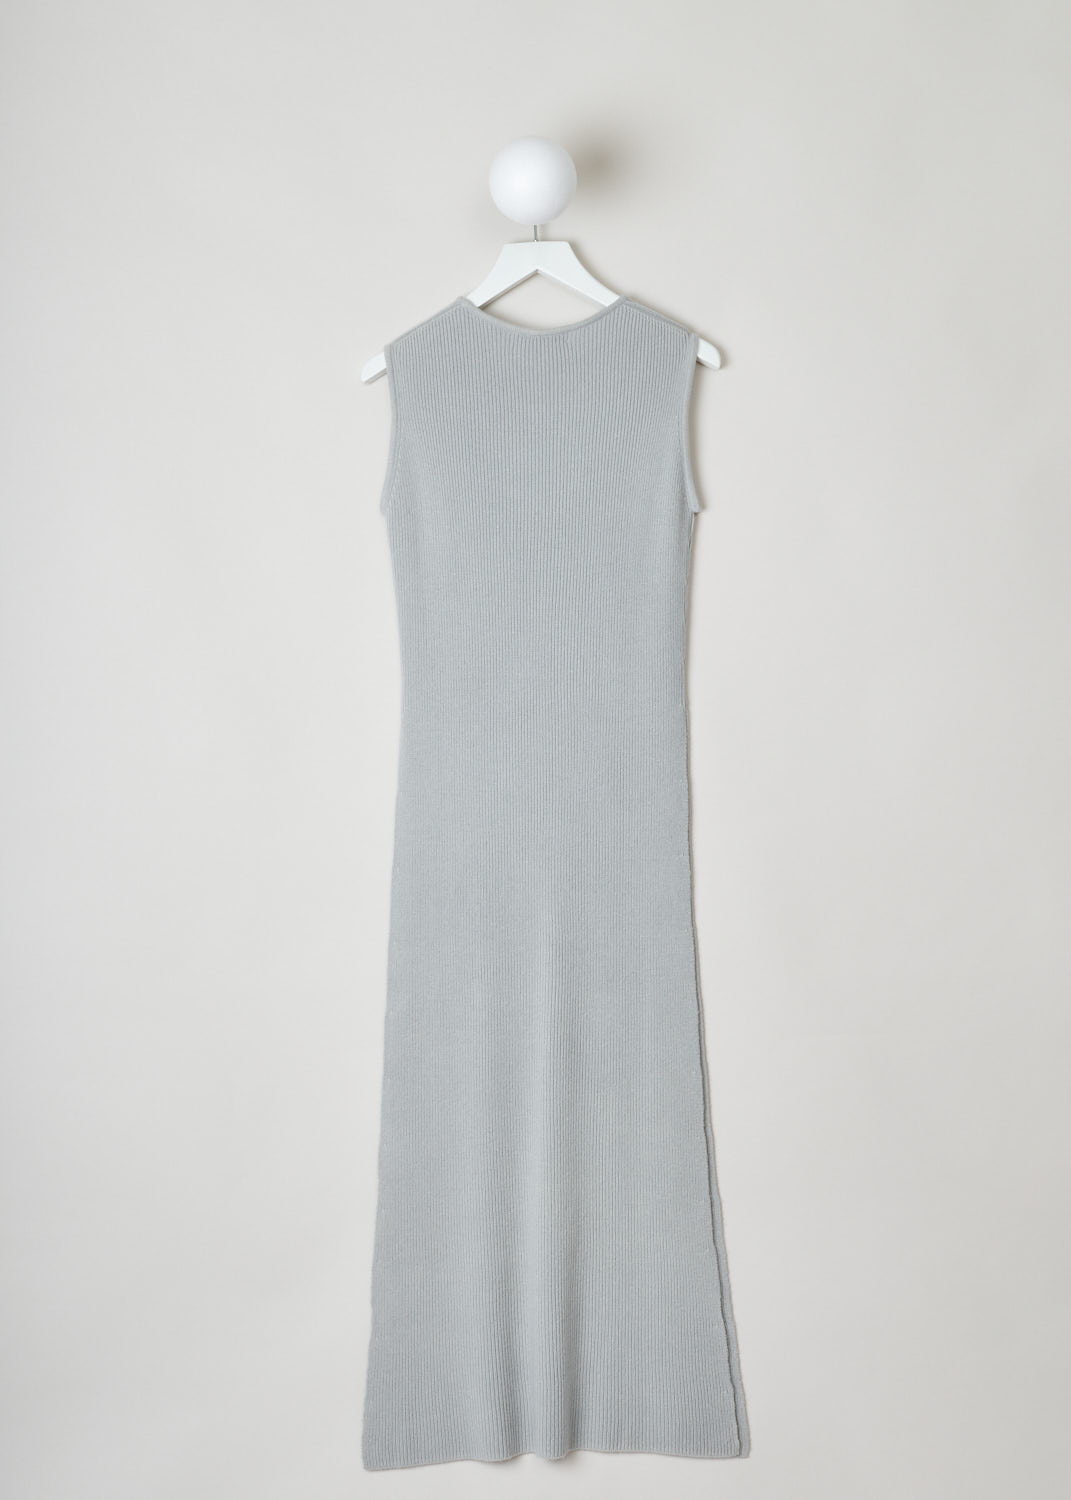 Tuinch, Knitted grey dress, Sumdress_007_grey, grey, back. Maxi-length knitted dress in light grey with a round neckline and no sleeves. This dress has a split on each side that goes up hip height. 